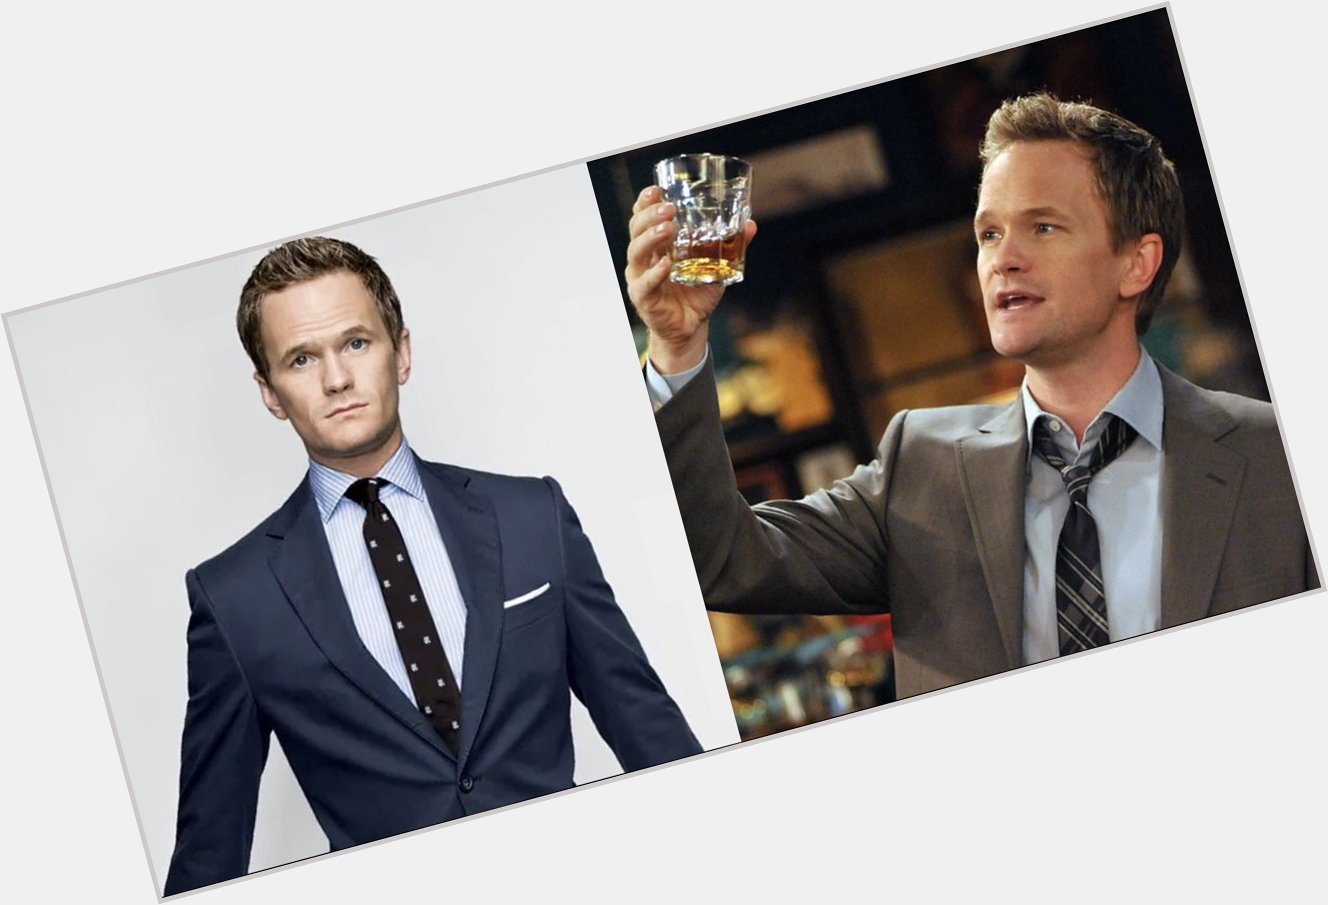 Happy 49th birthday to Neil Patrick Harris, who played the legen-wait for it-dary Barney Stinson 